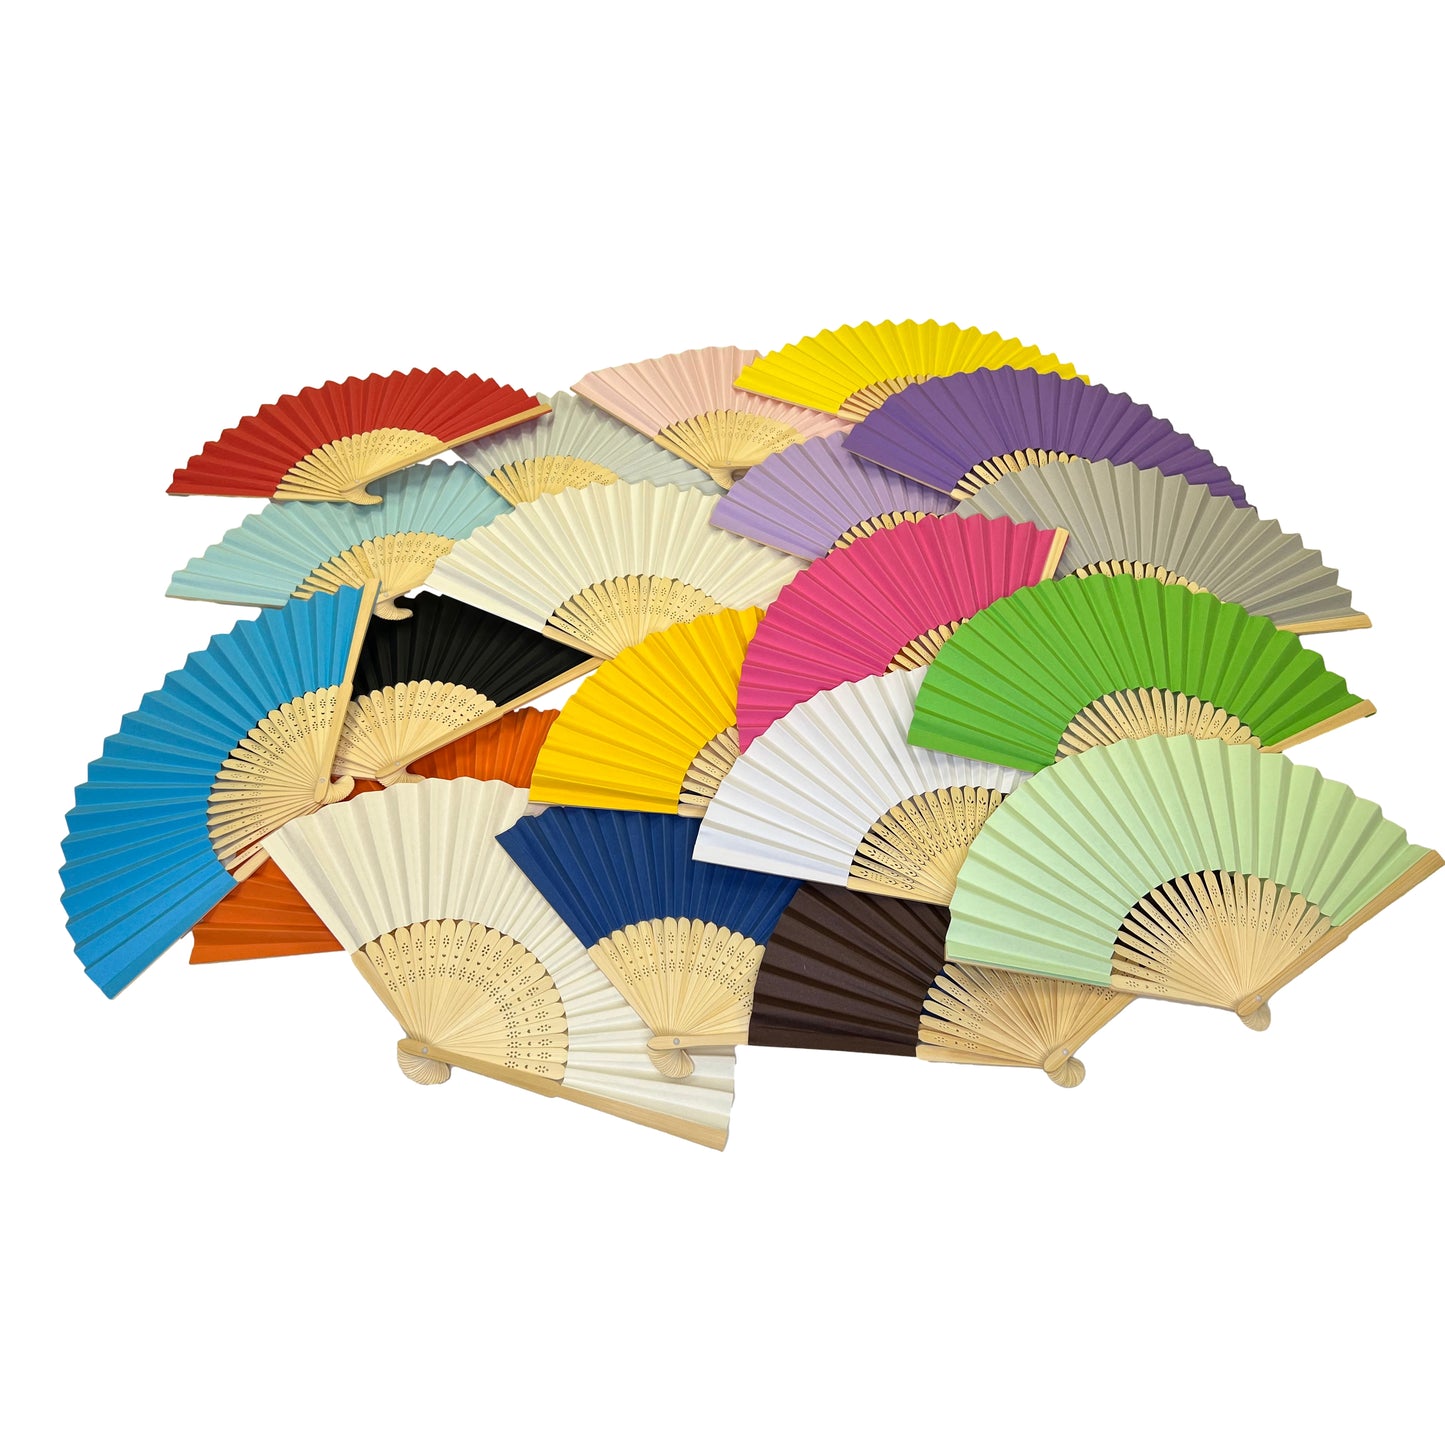 Pack of 50 Rice White Paper Foldable Hand Held Bamboo Wooden Fans by Parev